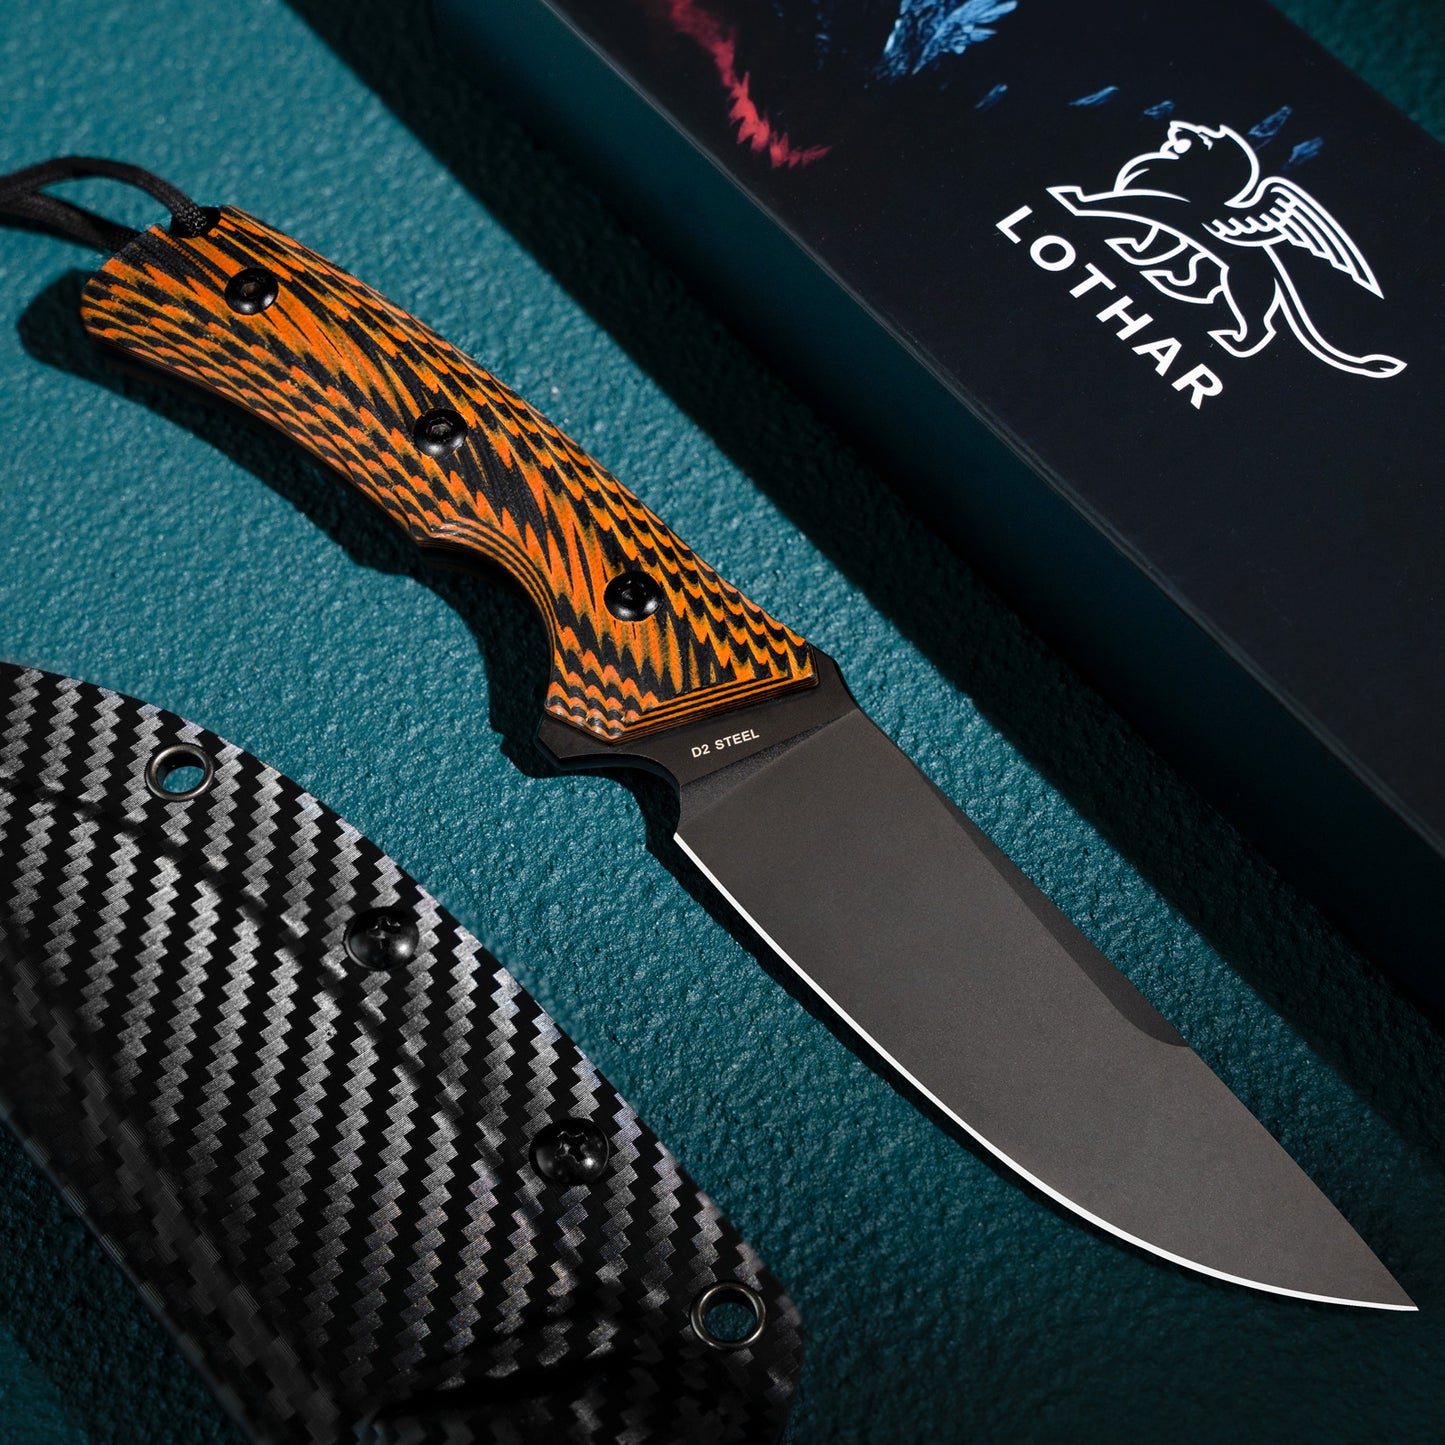 LOTHAR FOX Fixed Blade Hunting Knife, 4.5‘’ D2 Steel Blade Full Tang Knife, G10 Handle, Great Knife for Survival, Camping, Bushcraft or Hunting